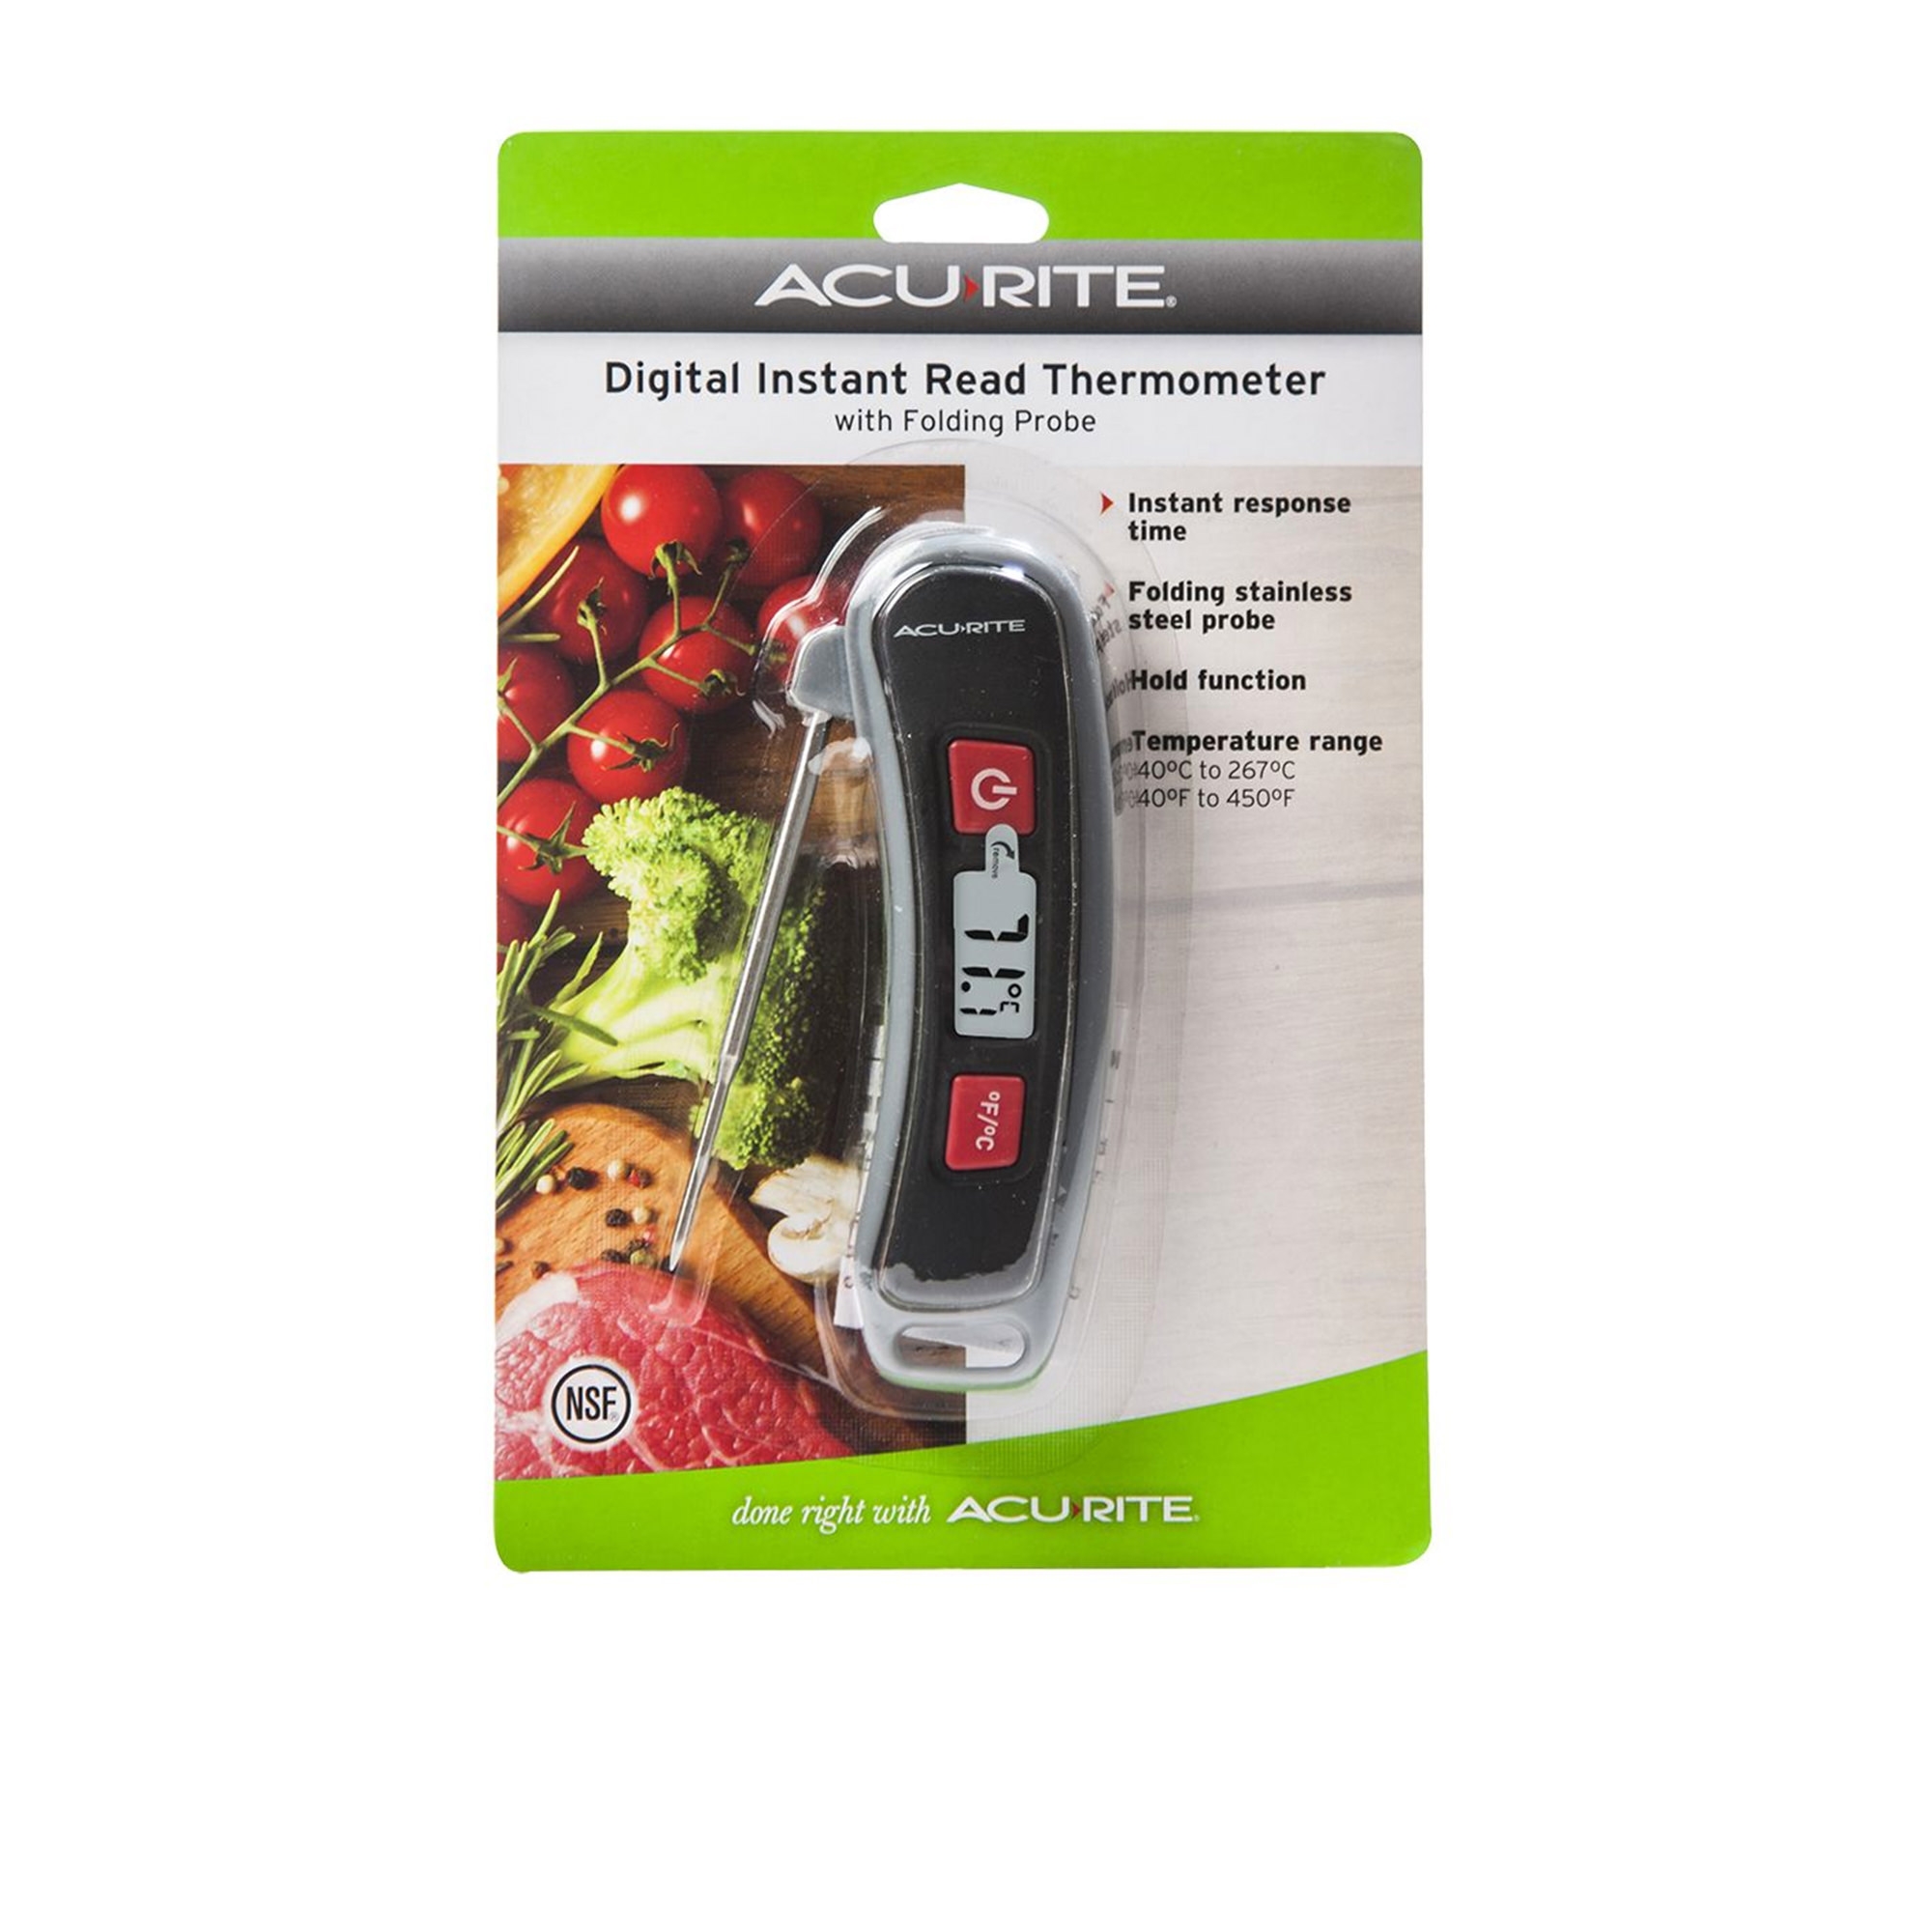 Acurite Digital Instant Read Thermometer with Folding Probe Image 2